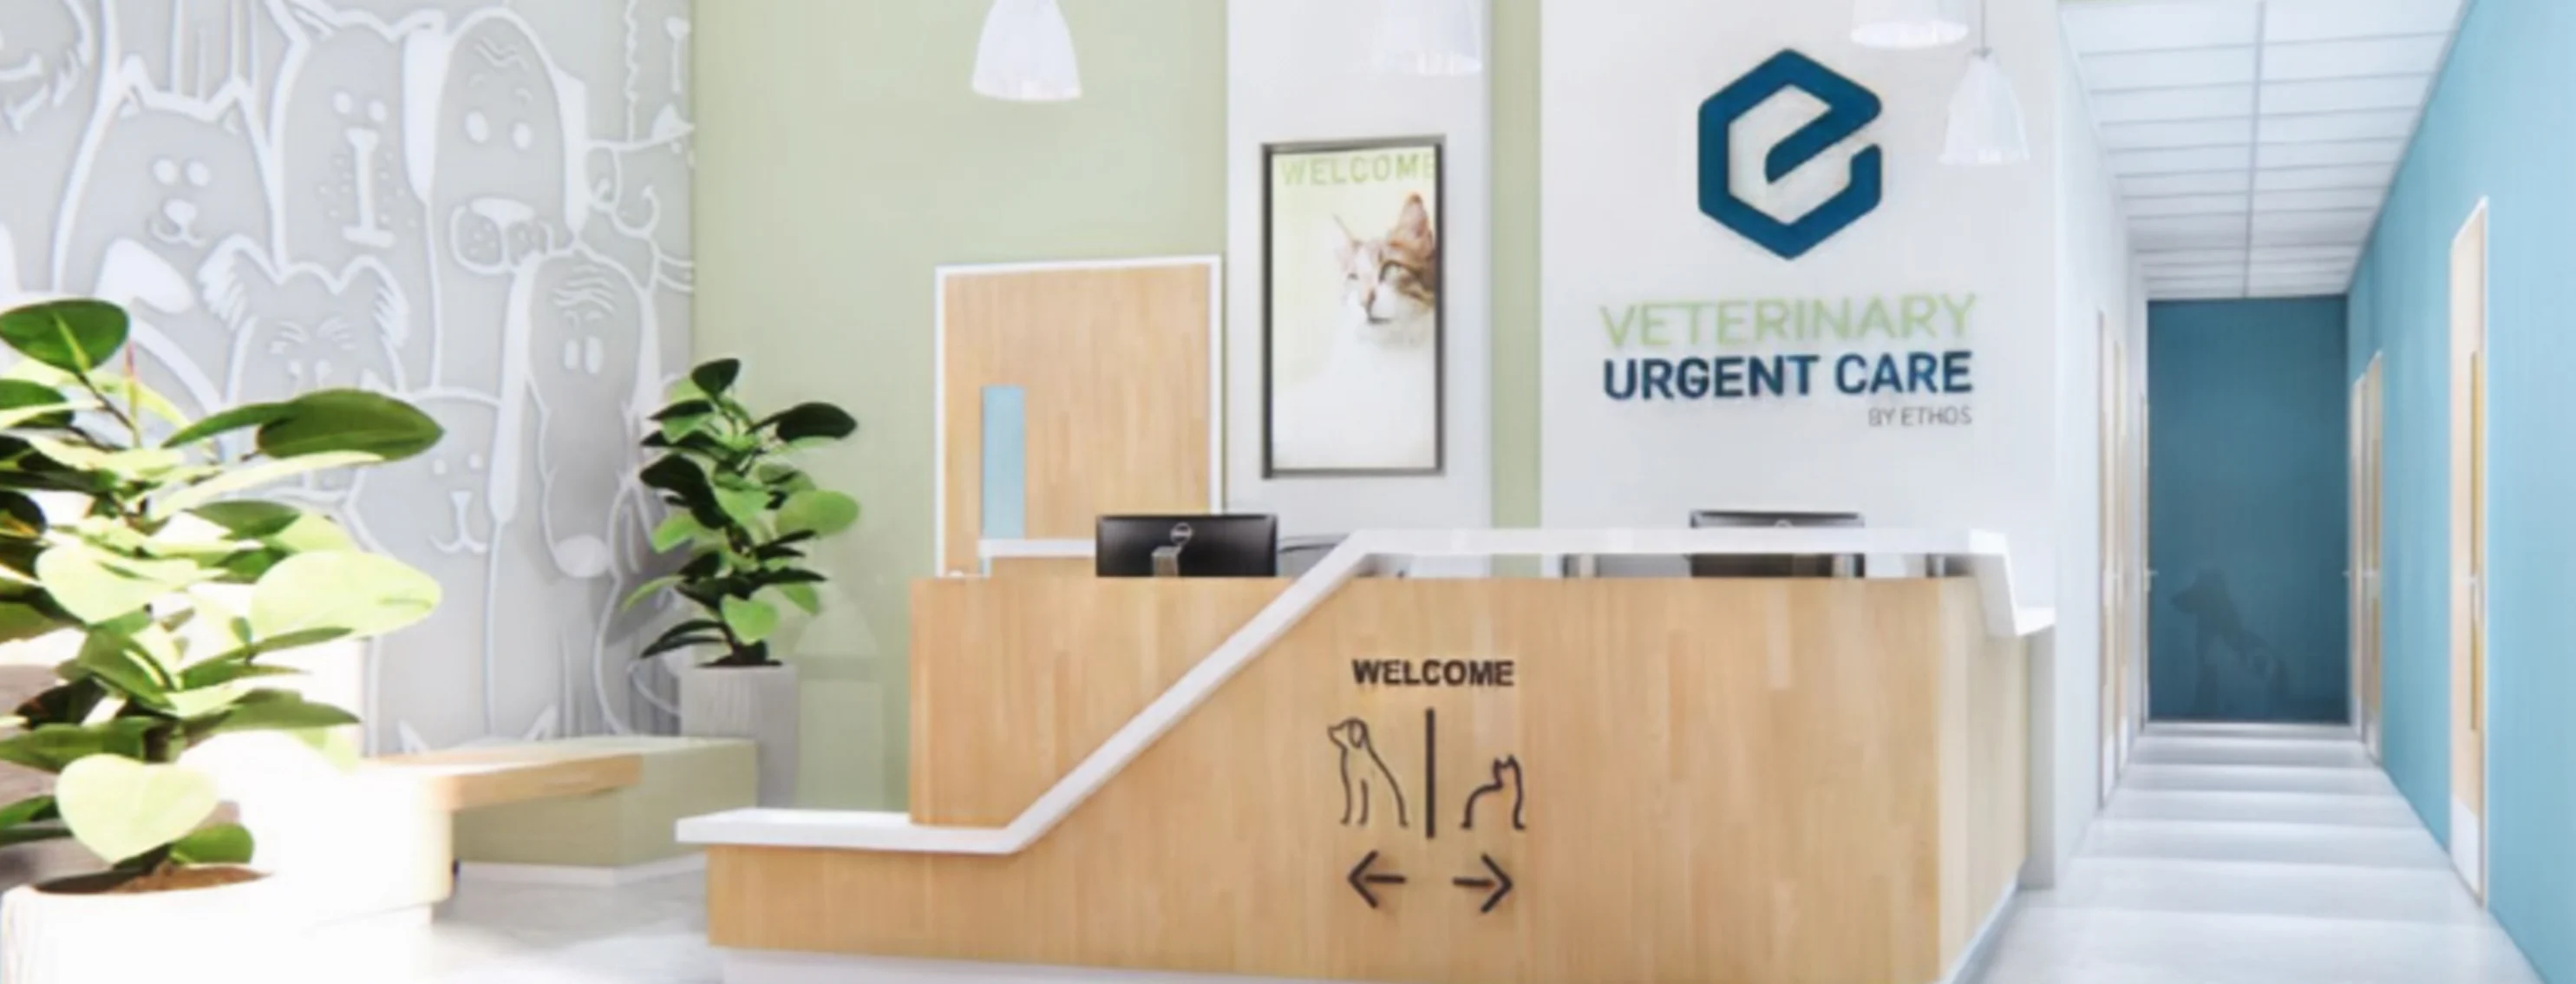 A concept for a Veterinary Urgent Care lobby